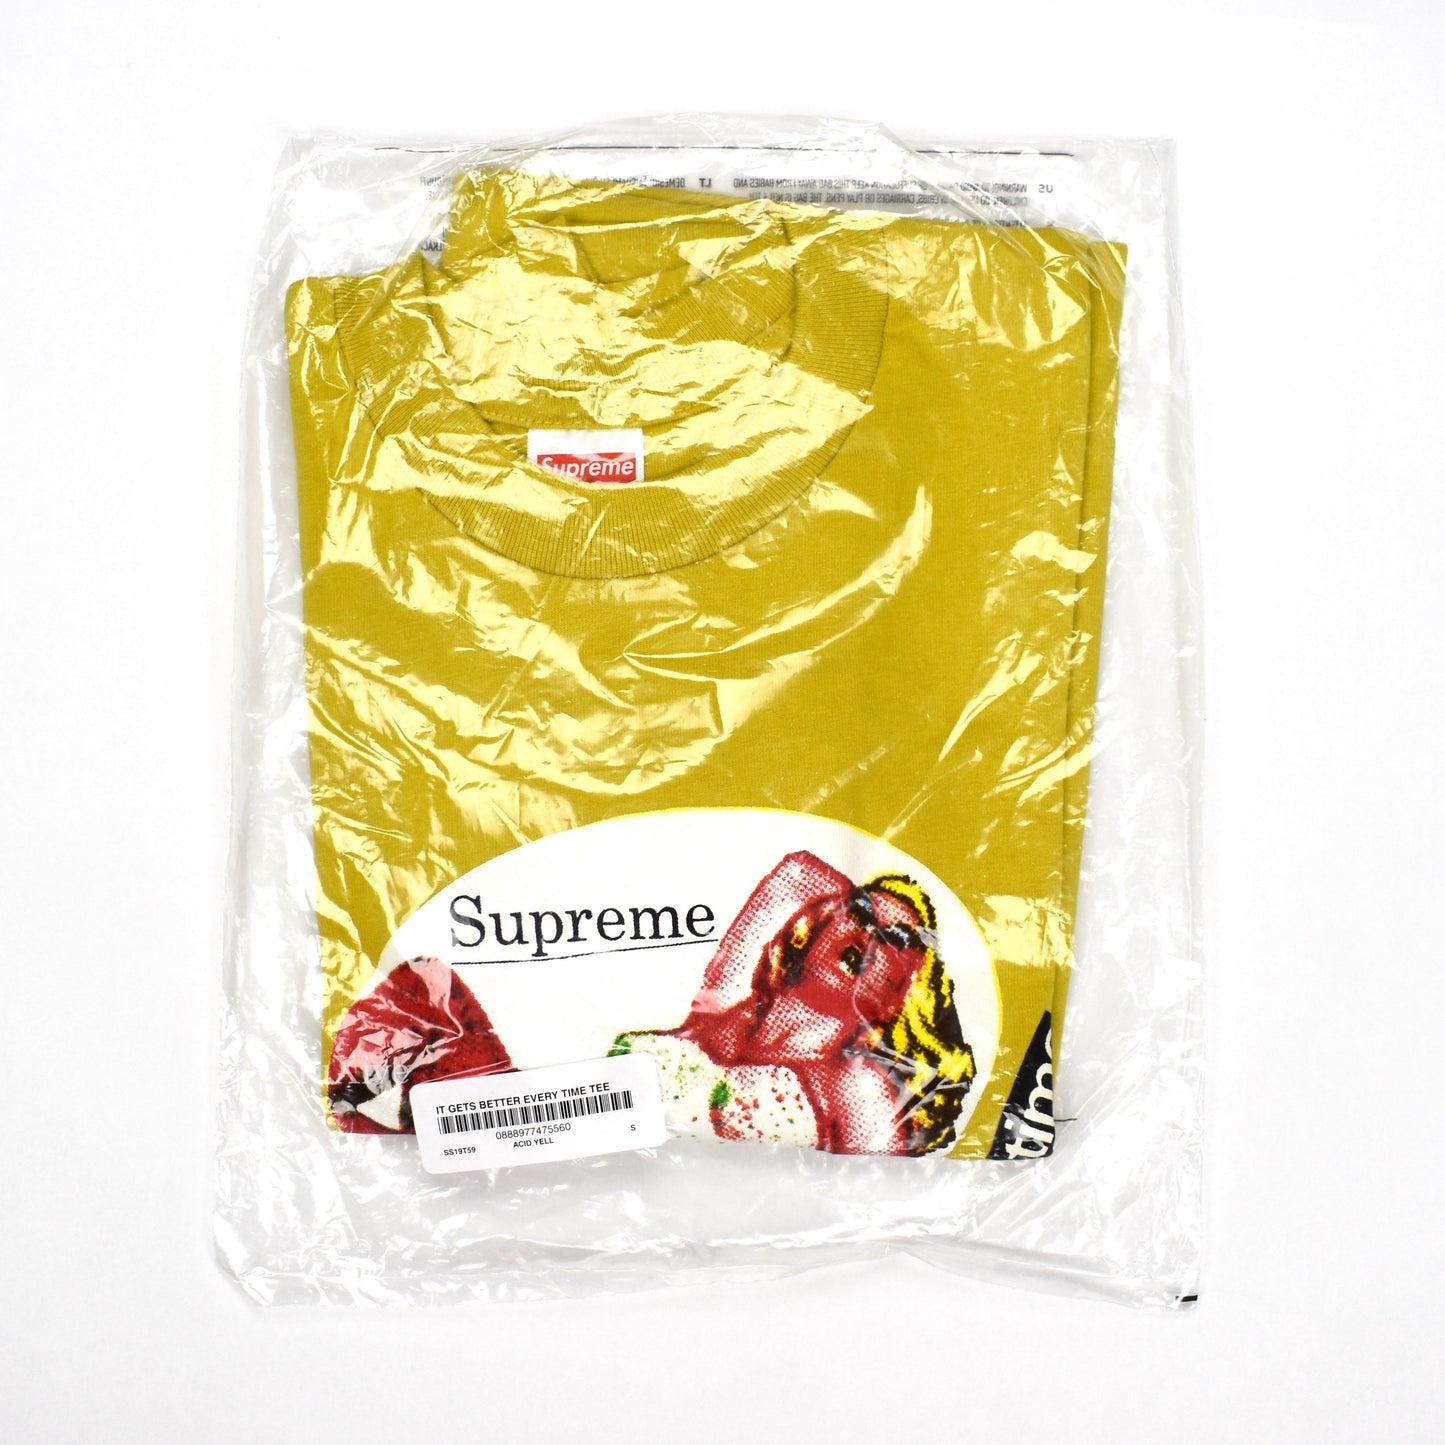 Supreme - It Gets Better Every Time Logo T-Shirt (Acid Yellow)